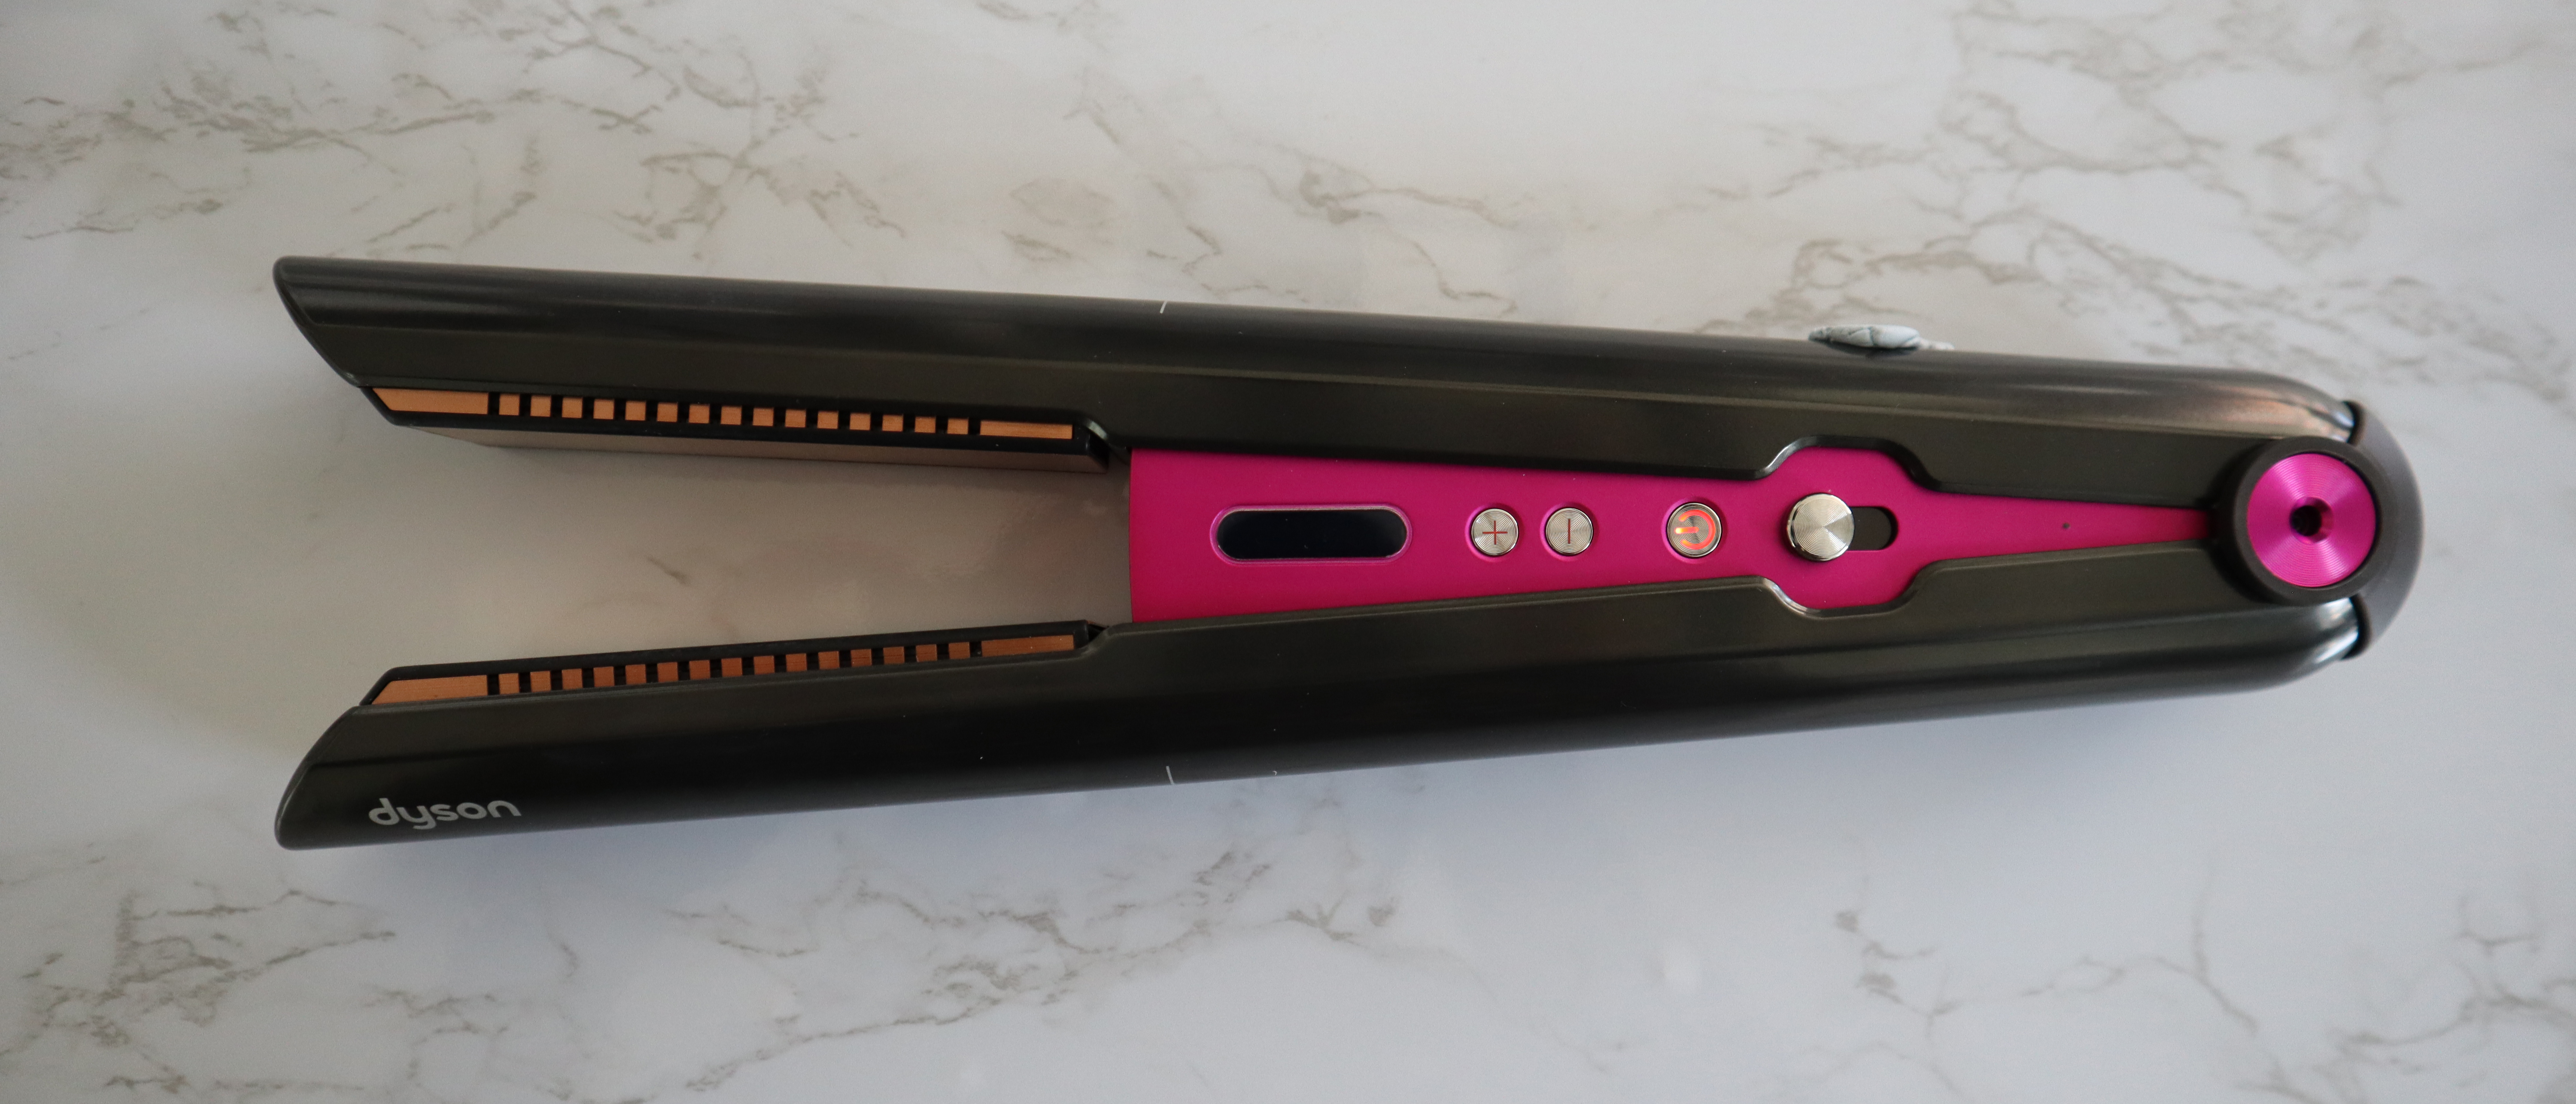 Product Overview: How the Dyson Corrale Straightener's Flexing Plates Cause  Less Damage to Your Hair